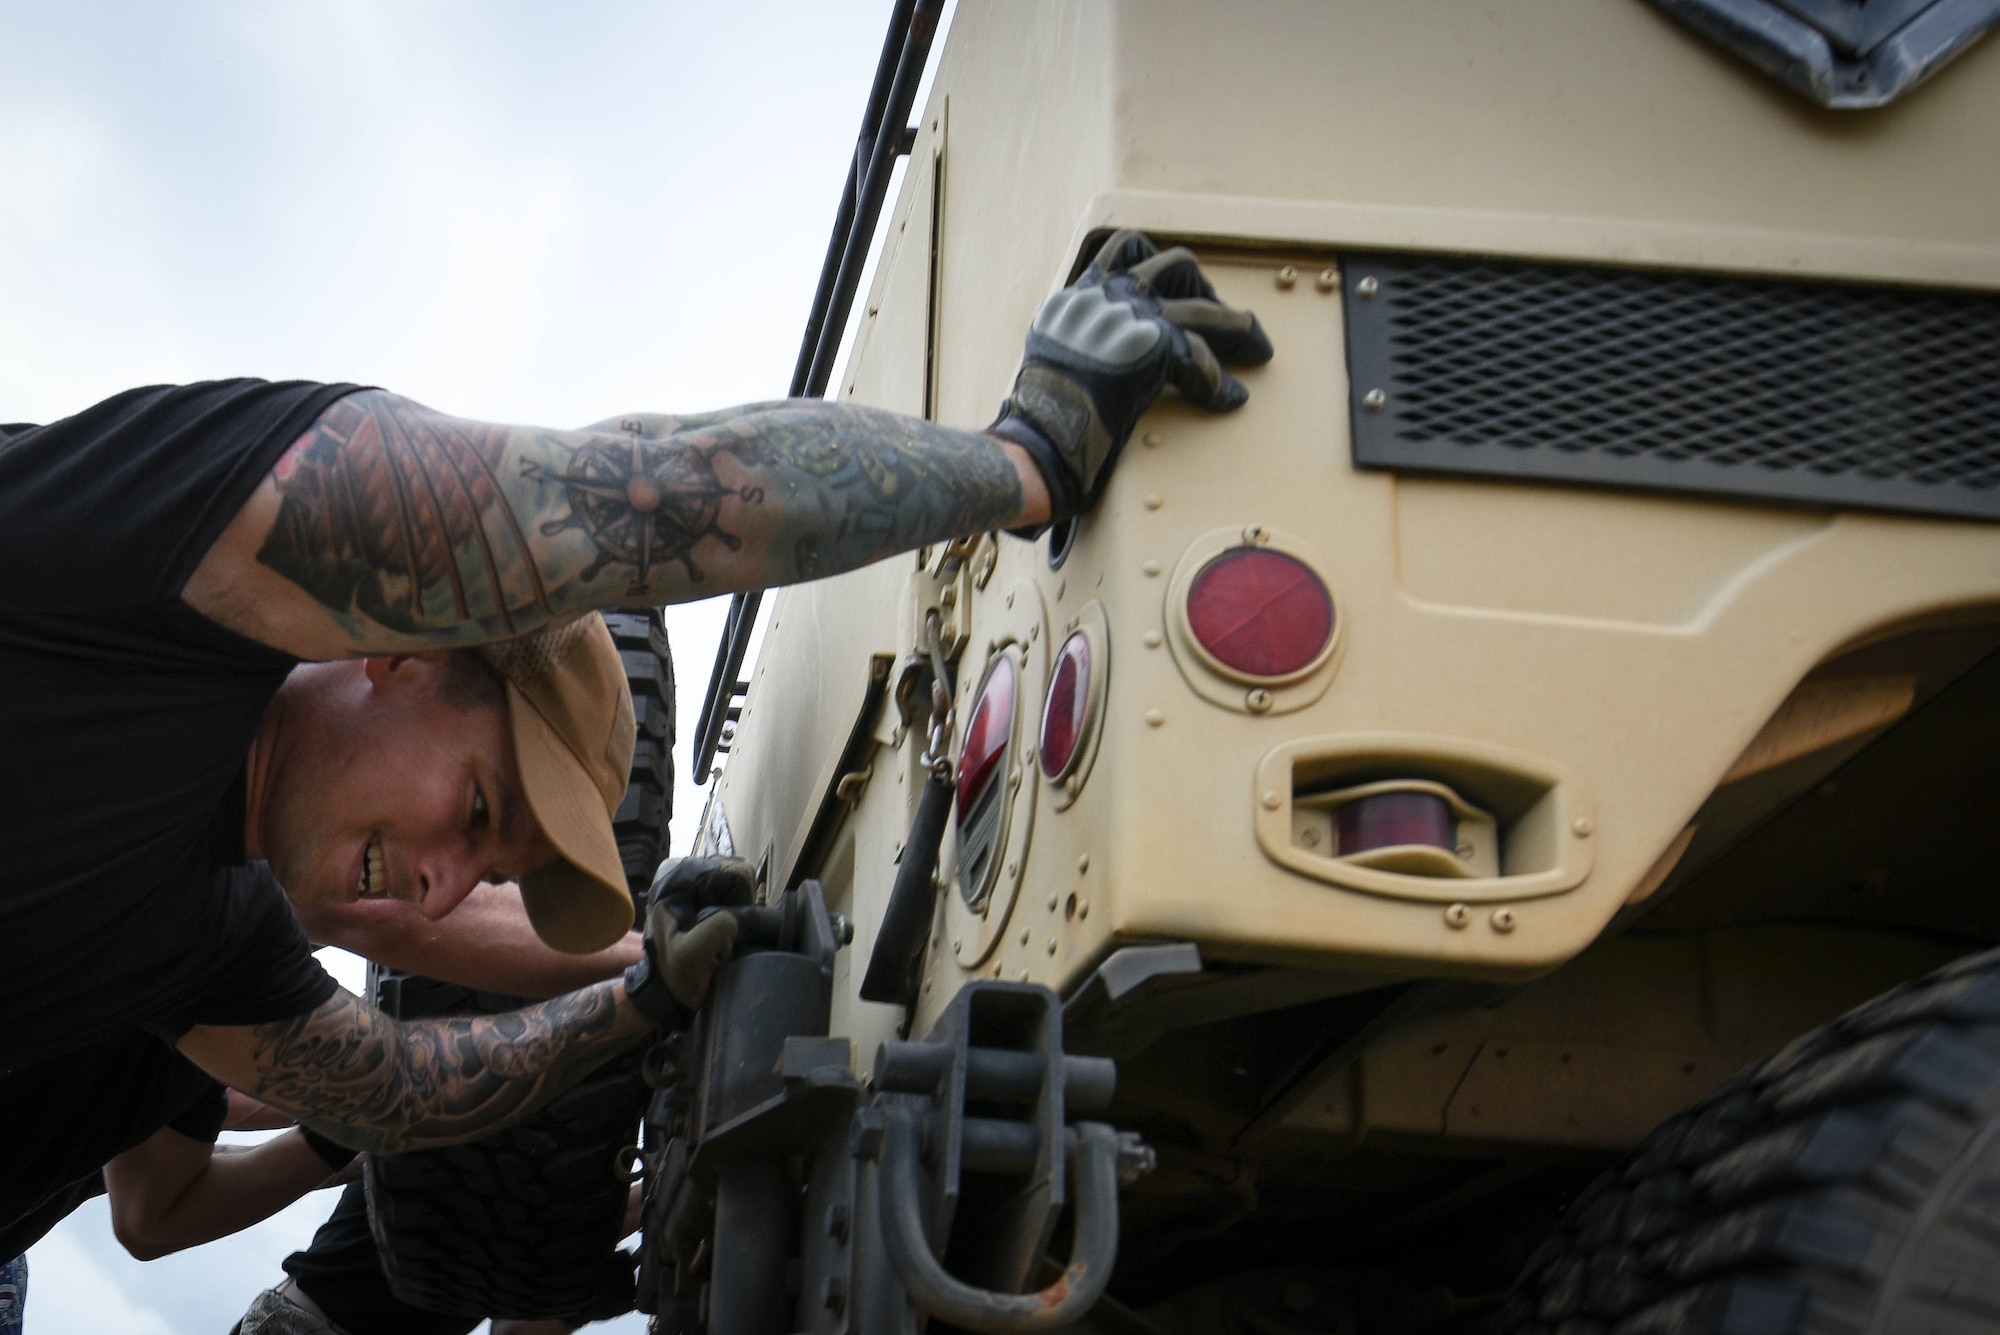 U.S. Air Force Staff Sgt. Patrick Formiller, 20th Security Forces Squadron flight sergeant, pushes a Humvee during the National Police Week Defenders Challenge at Shaw Air Force Base, S.C., May 15, 2018.